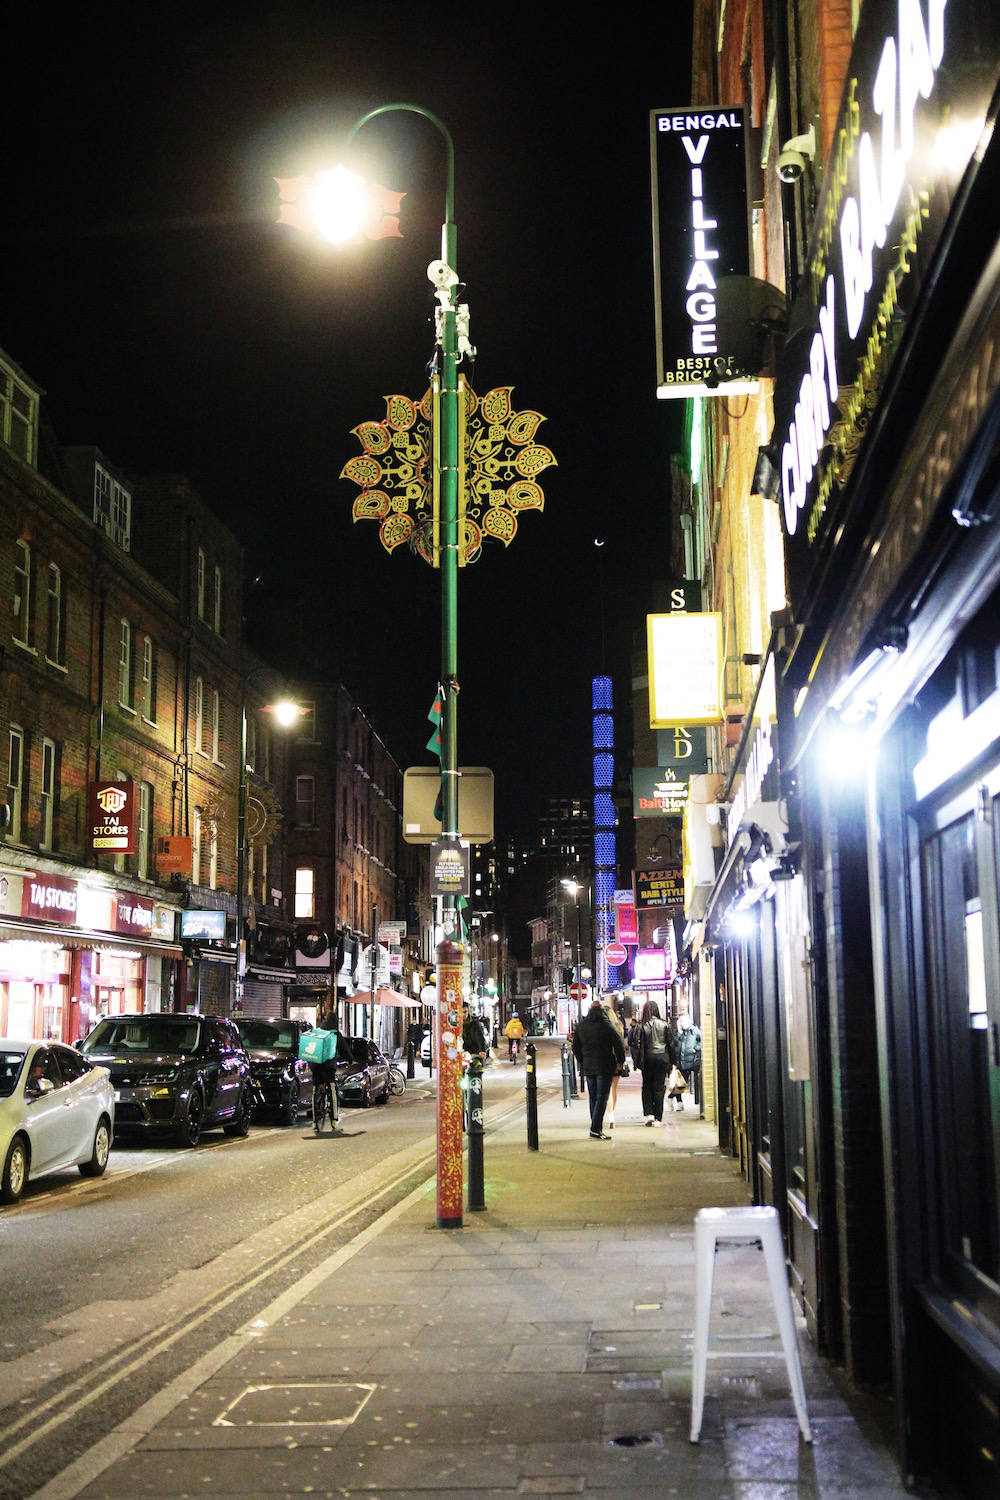 A street view of Brick Lane featuring a Banglatown decoration on a lamp post.